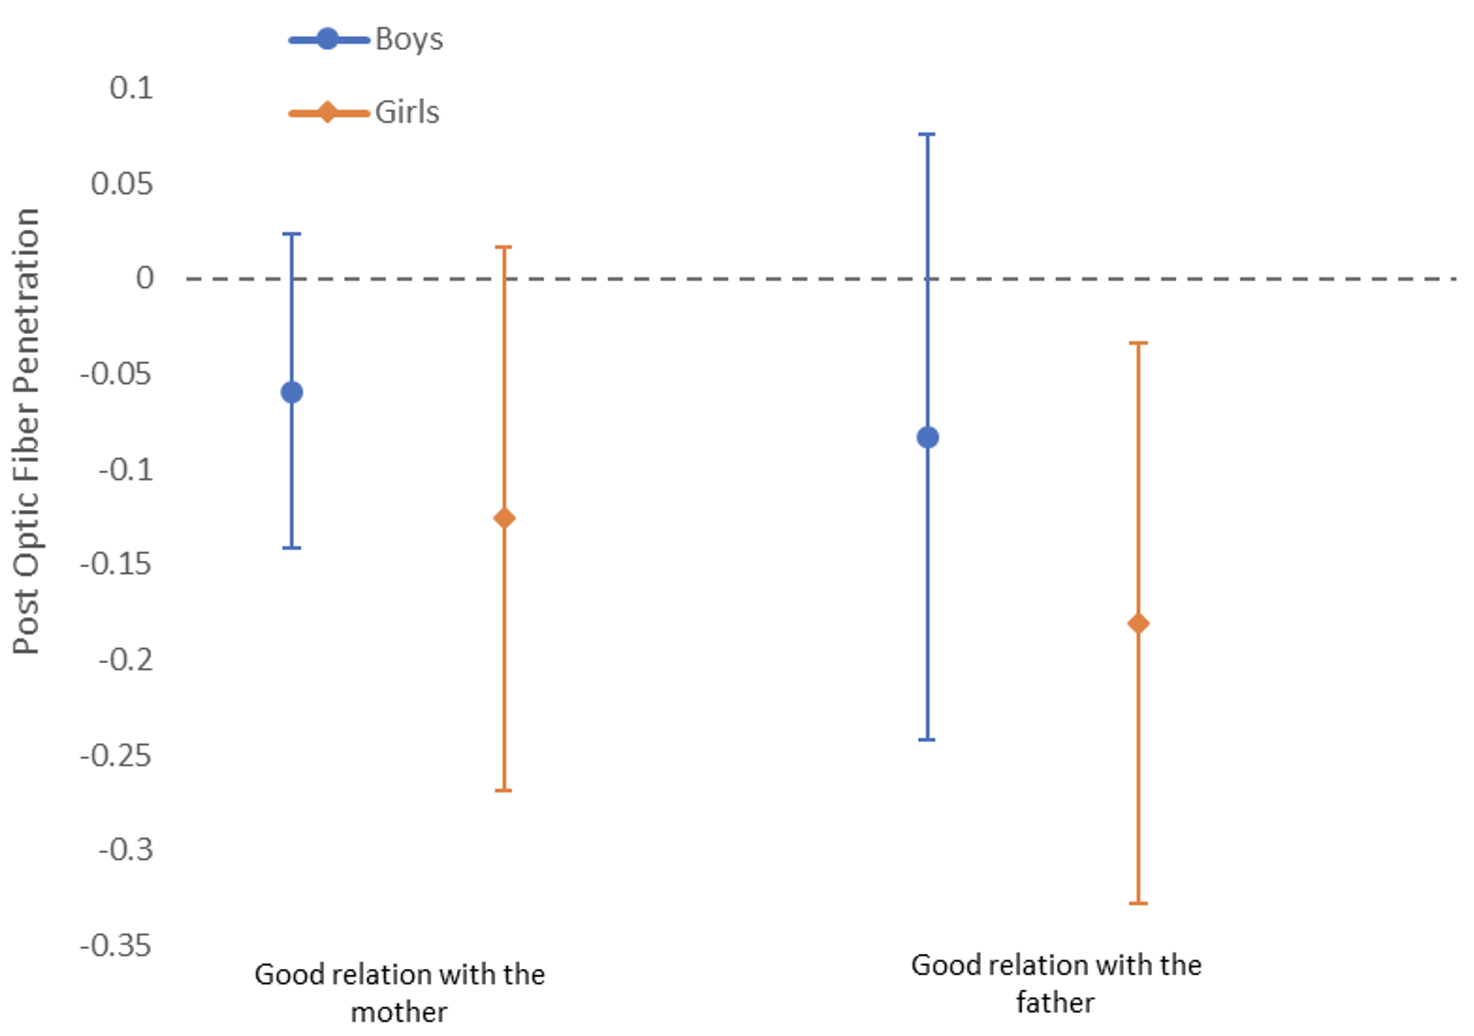 Figure 5 The effect of fibre penetration on the relationship of adolescents aged 14 to 18 years with their parents